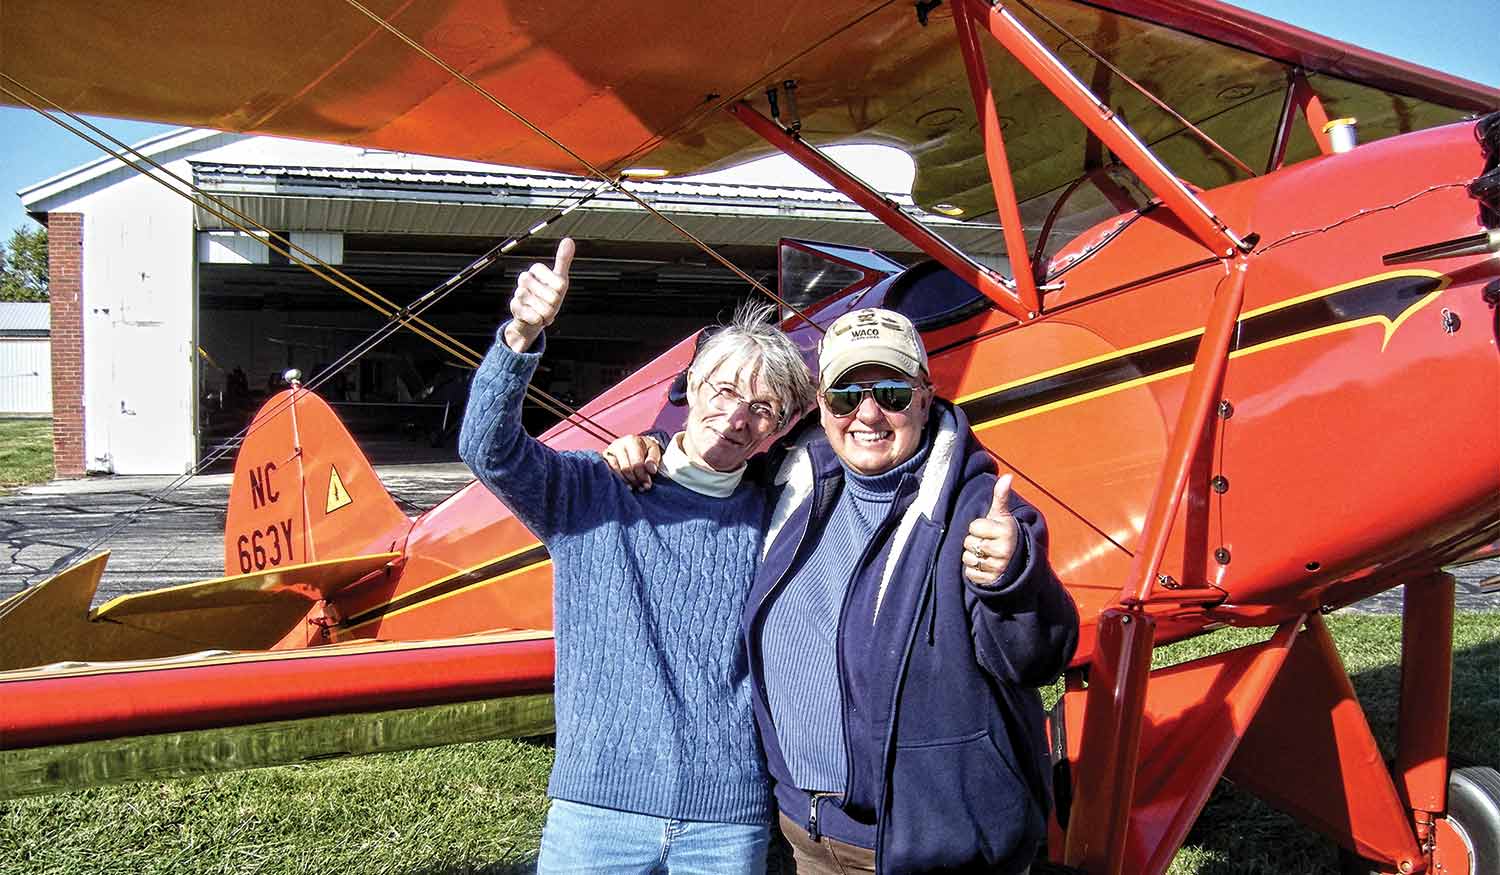 Unusual Attitudes: The Privilege of Being a Pilot